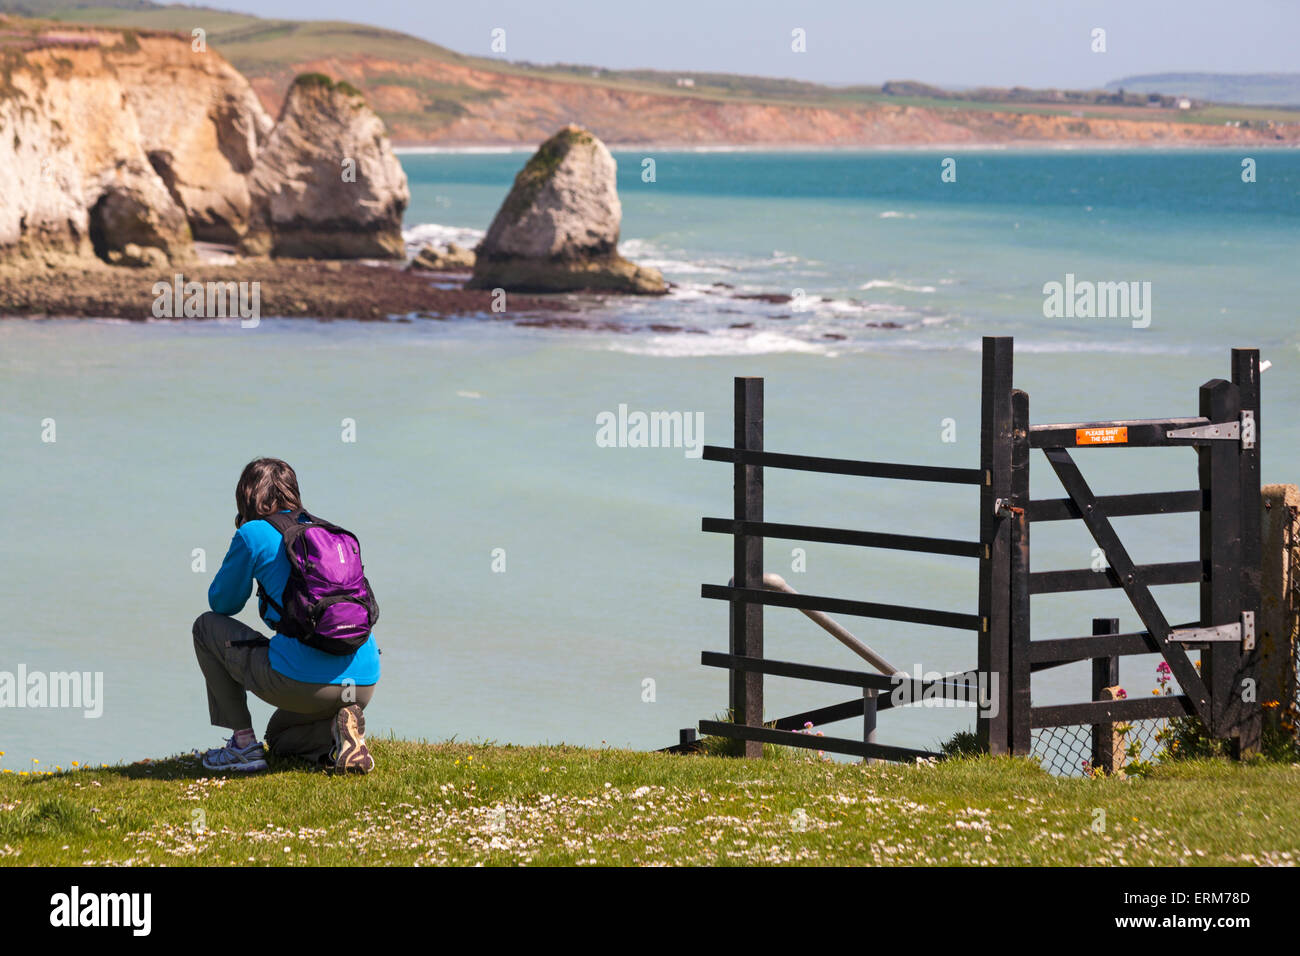 Woman taking a photograph of the landscape at Freshwater Bay, Isle of Wight, Hampshire UK in May - seastacks sea stacks Stock Photo